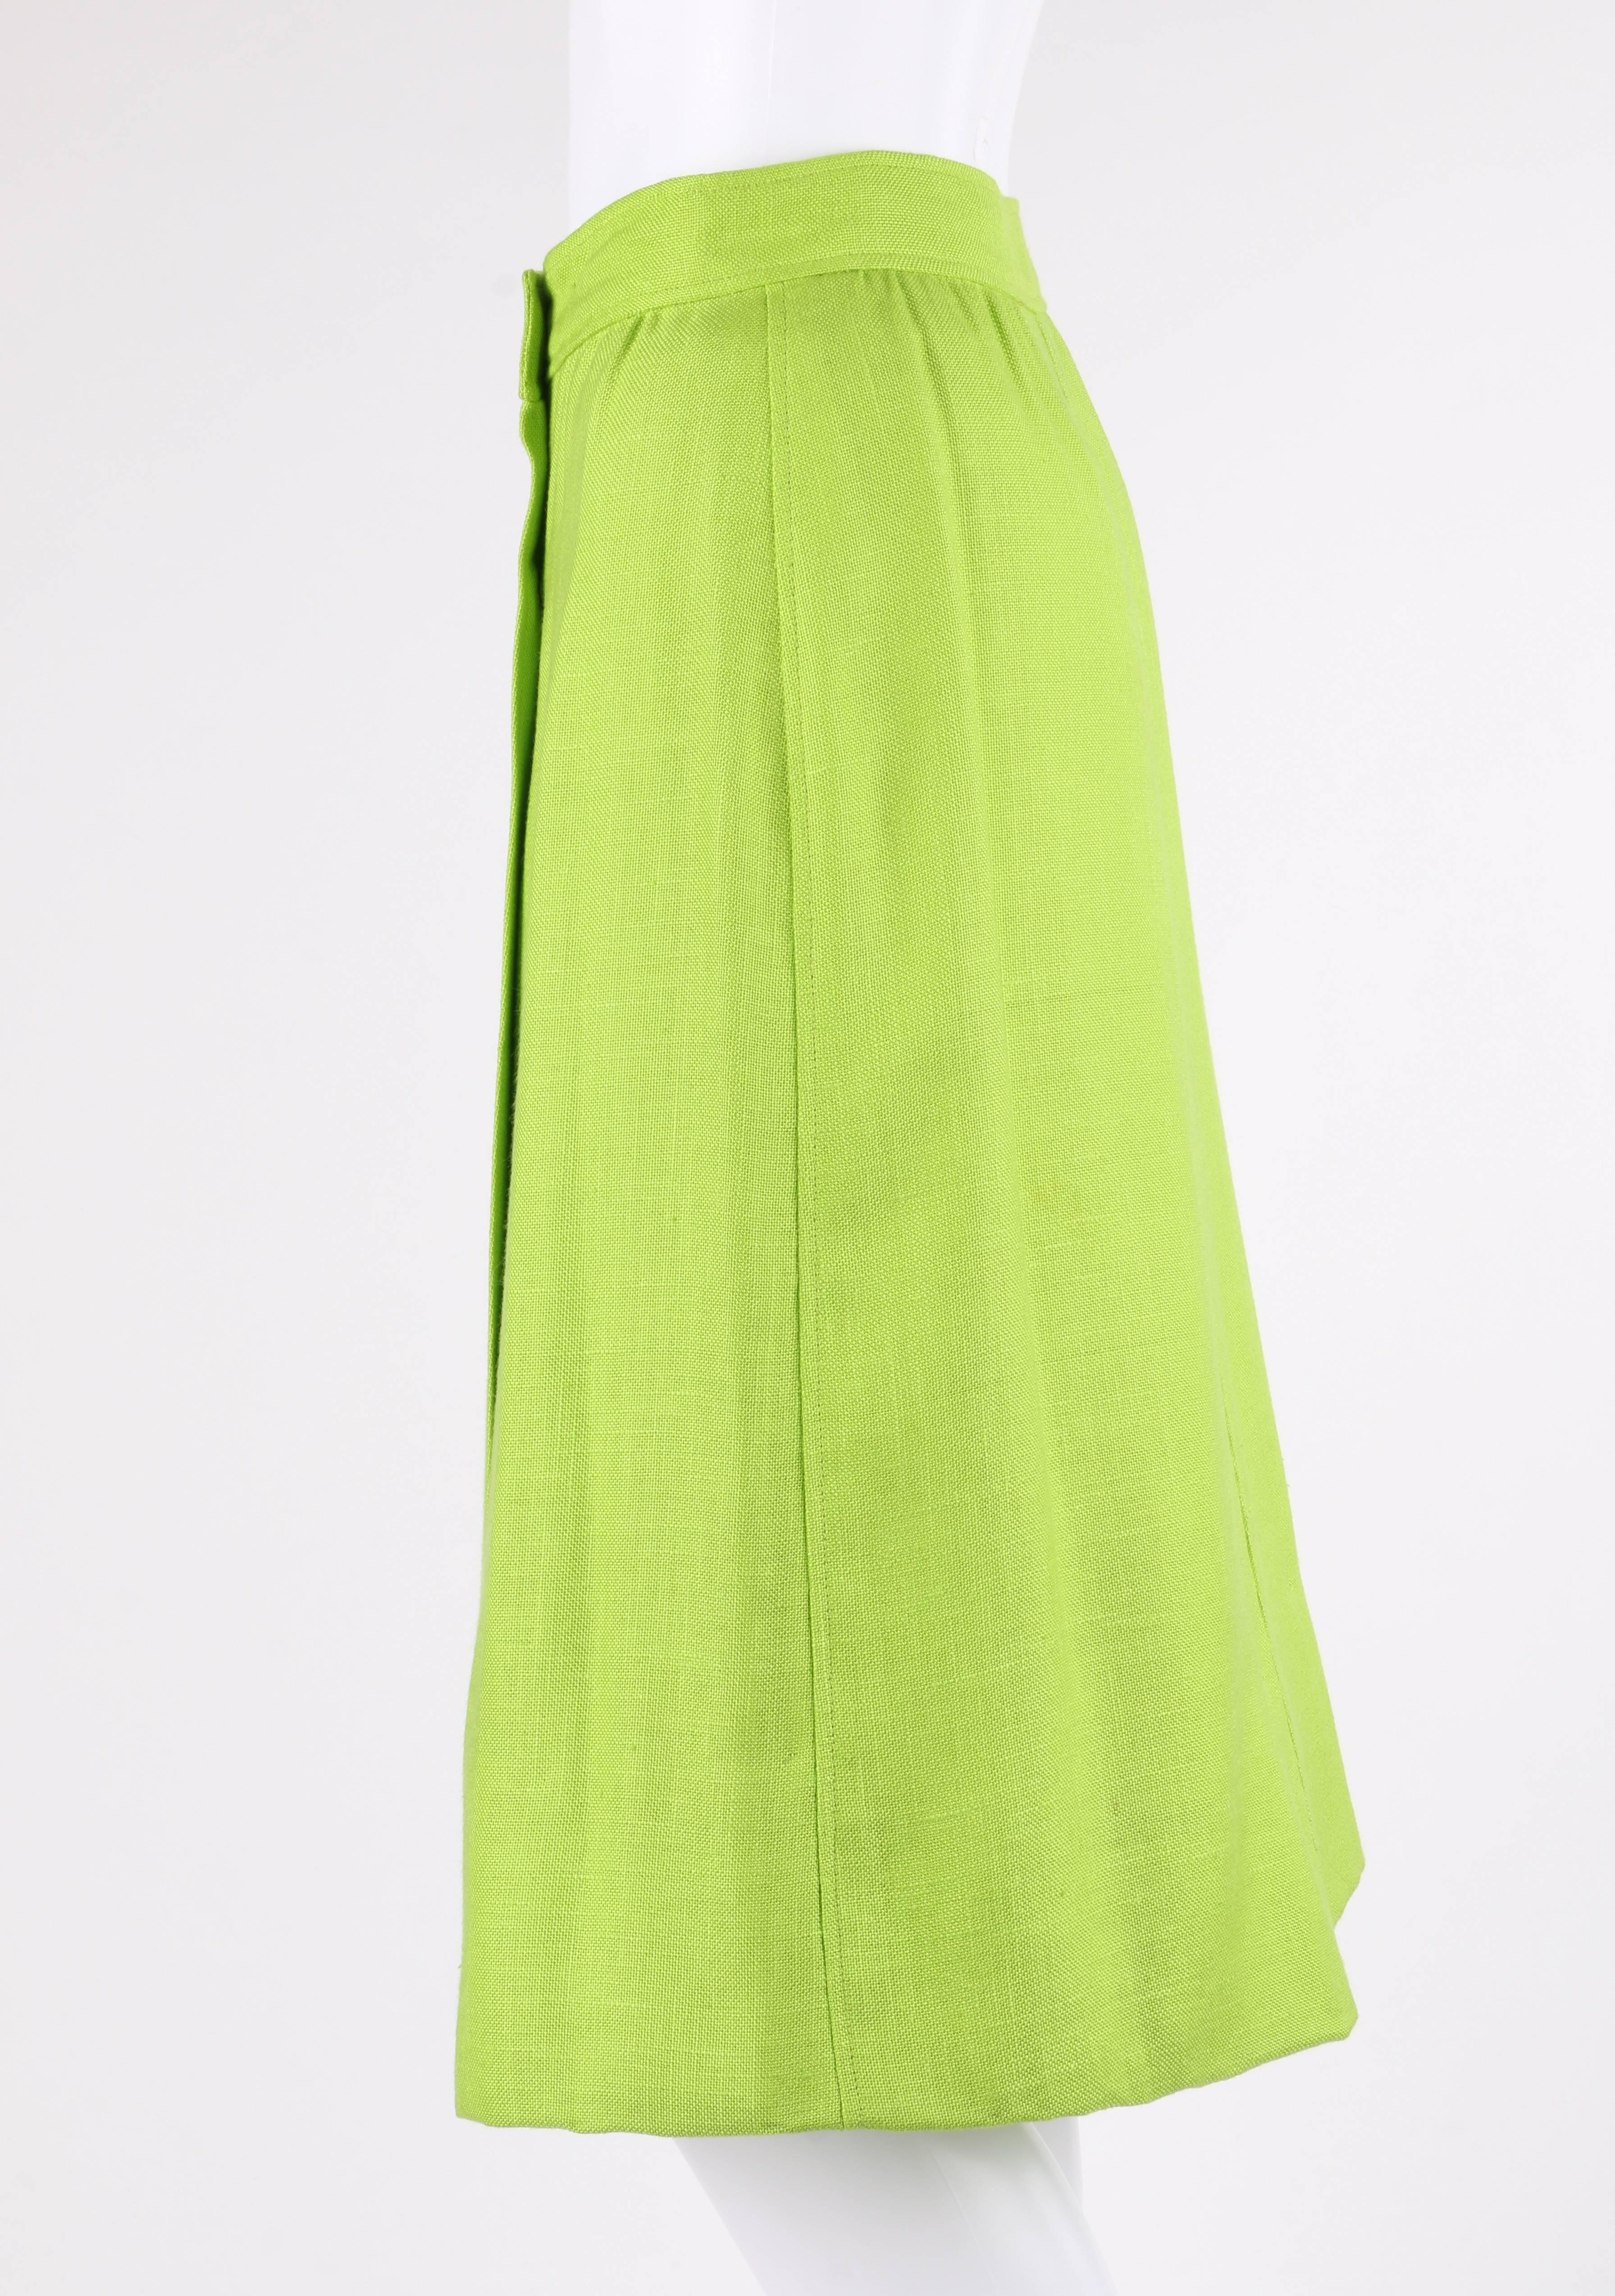 COURREGES Hyperbole c.1970's Lime Green Snap Front Tea Length Wrap Skirt  In Excellent Condition For Sale In Thiensville, WI